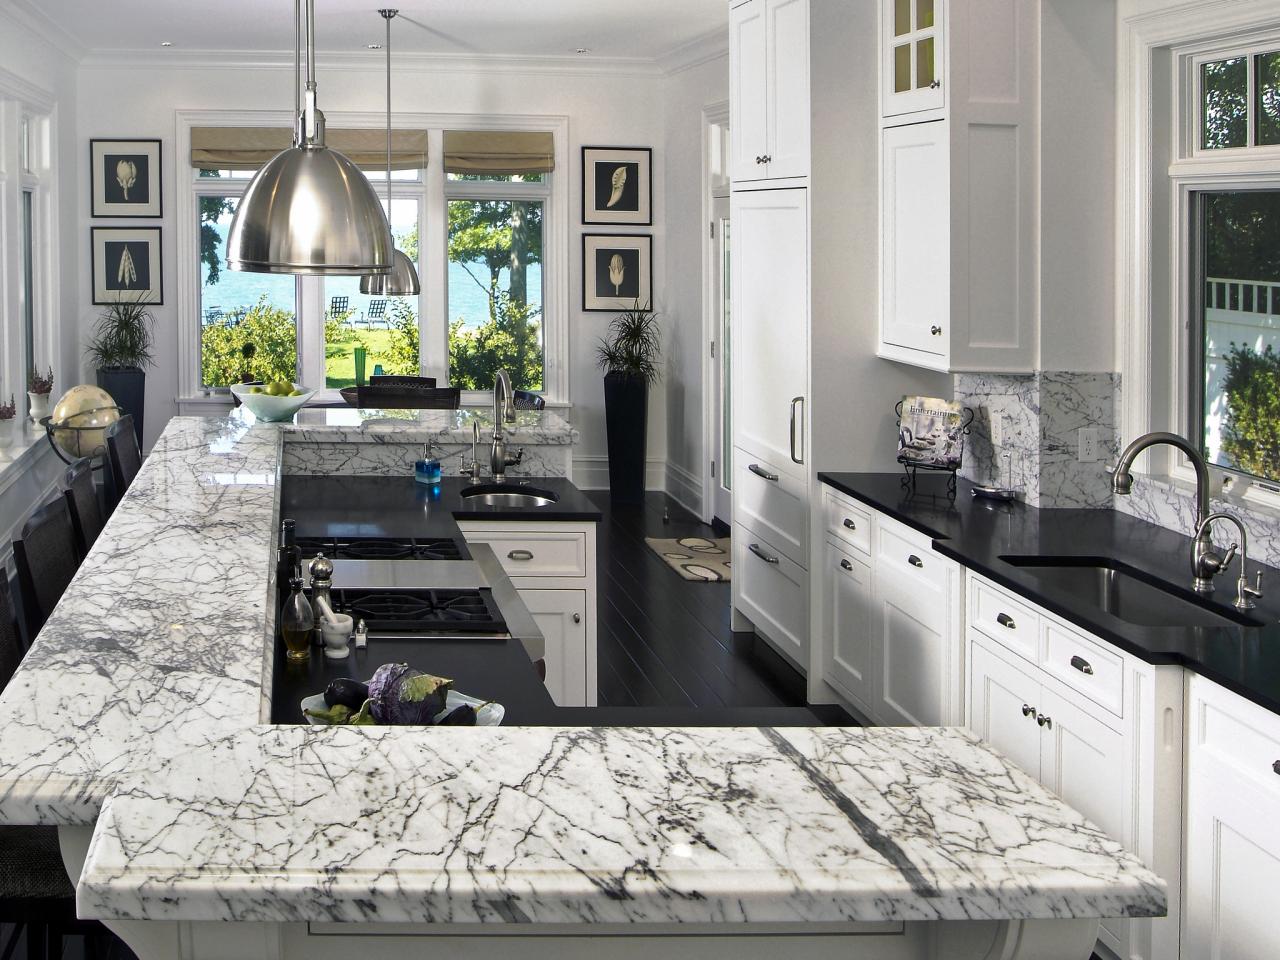 Quartz, Granite Or Solid Surface: What’s Your Perfect Kitchen